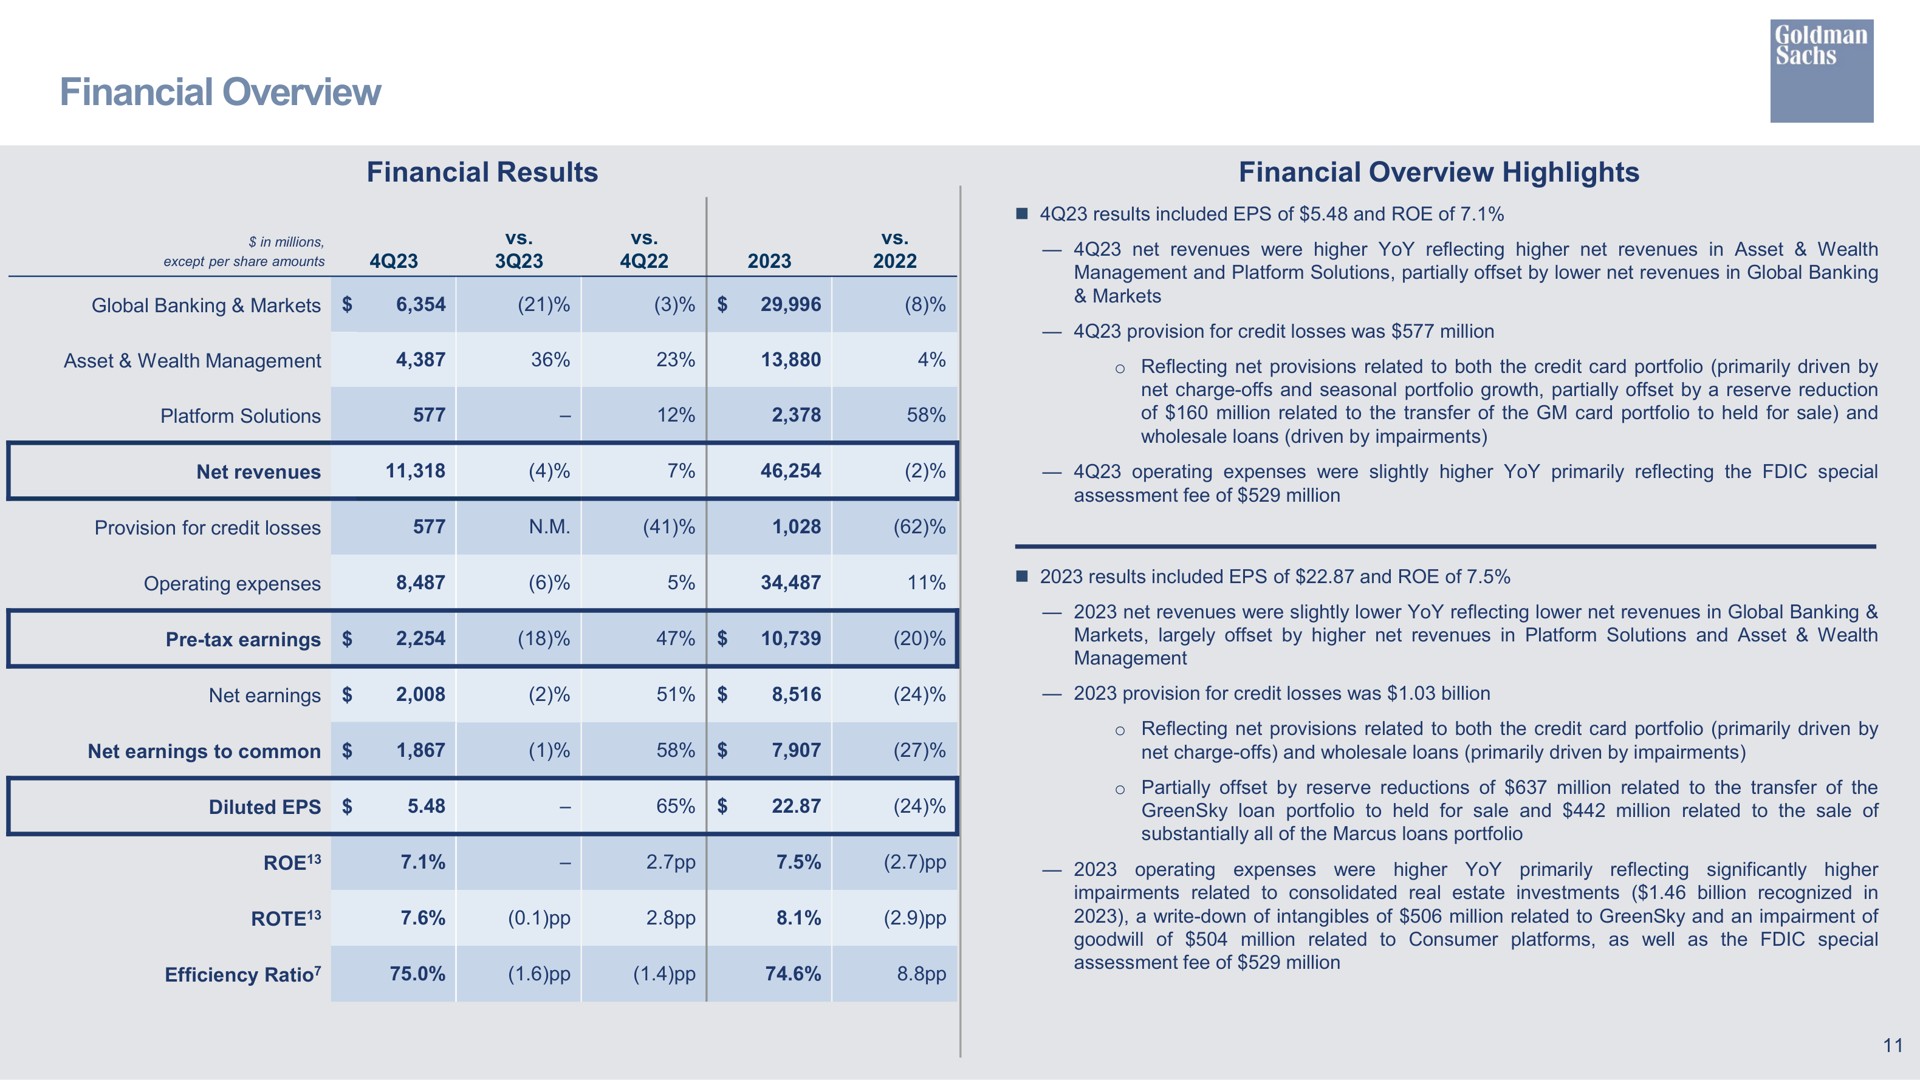 financial overview financial results financial overview highlights | Goldman Sachs